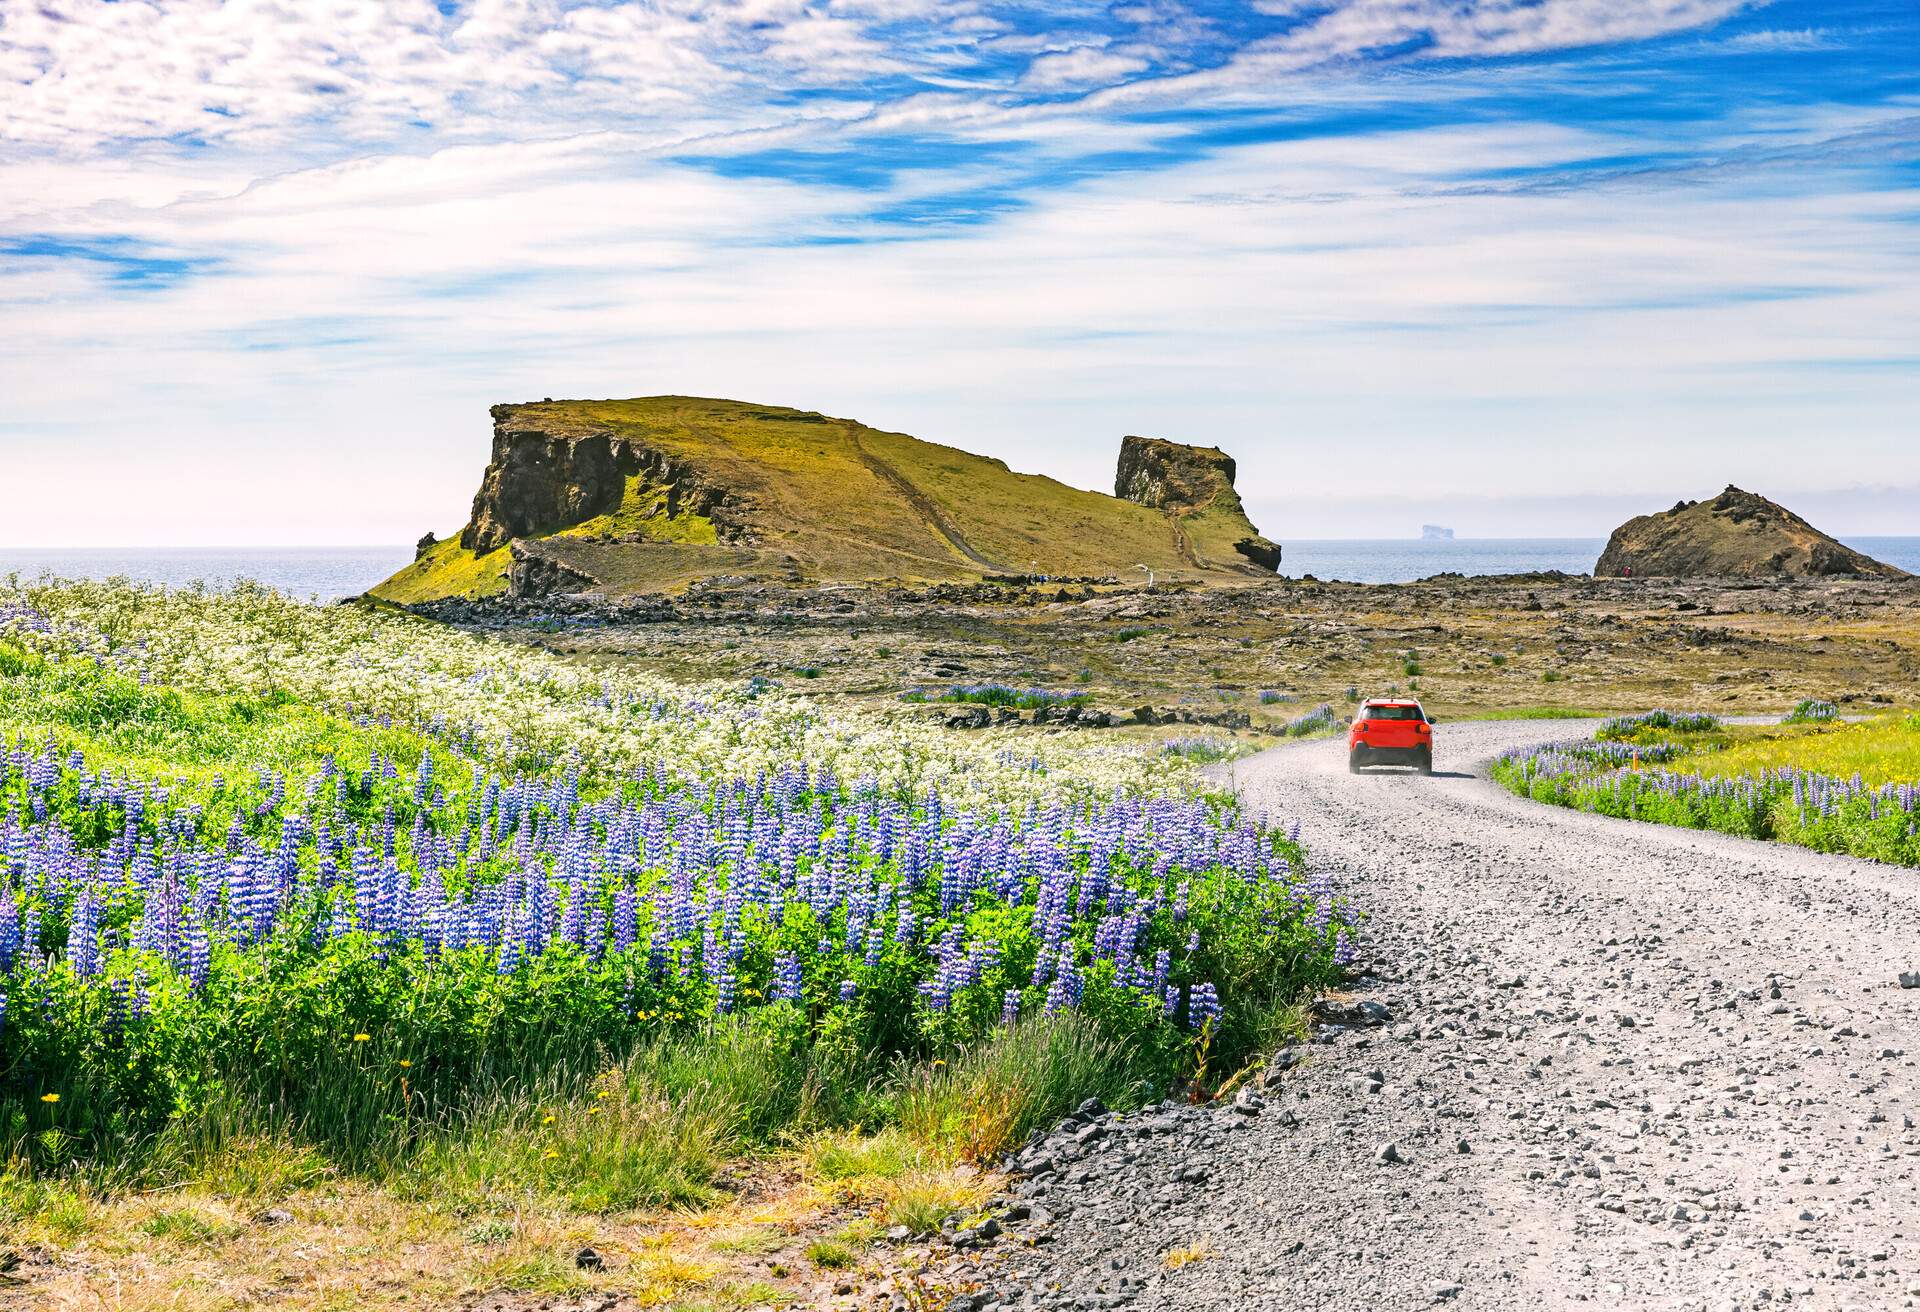 Golden Circle road trip in Iceland. Amazing Icelandic landscape. Lupine flowers by road side. Sophisticated rocks in background. Southern Peninsula Region by the Keflavik international airport.; Shutterstock ID 1494941570